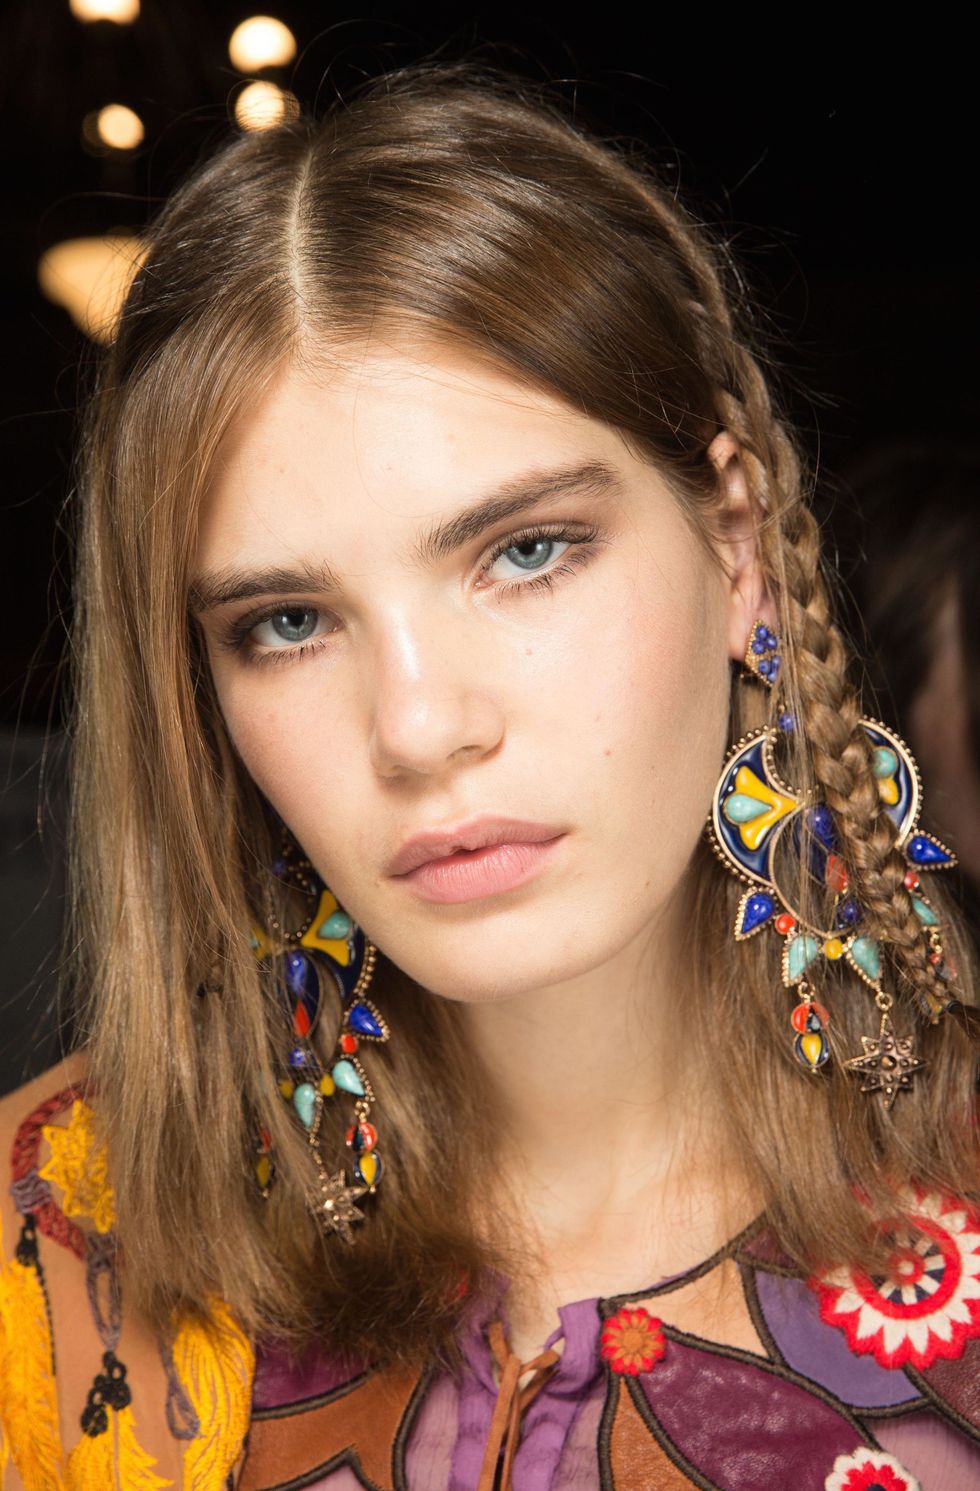 Spring/Summer 2017 hair and makeup trends